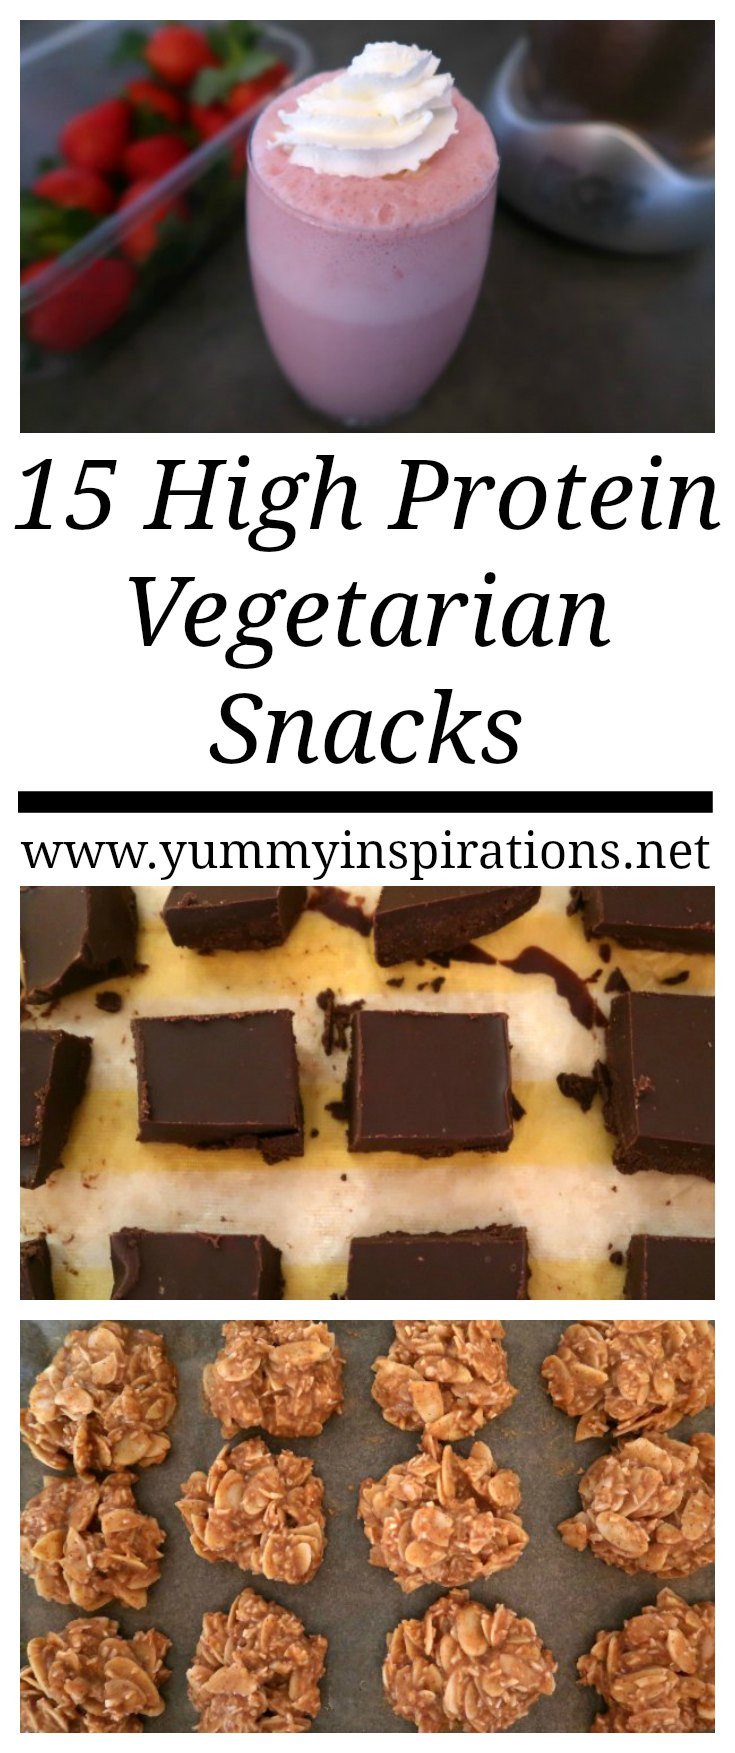 High Protein Vegetarian Snacks
 15 High Protein Ve arian Snacks Easy Meat Free Snack